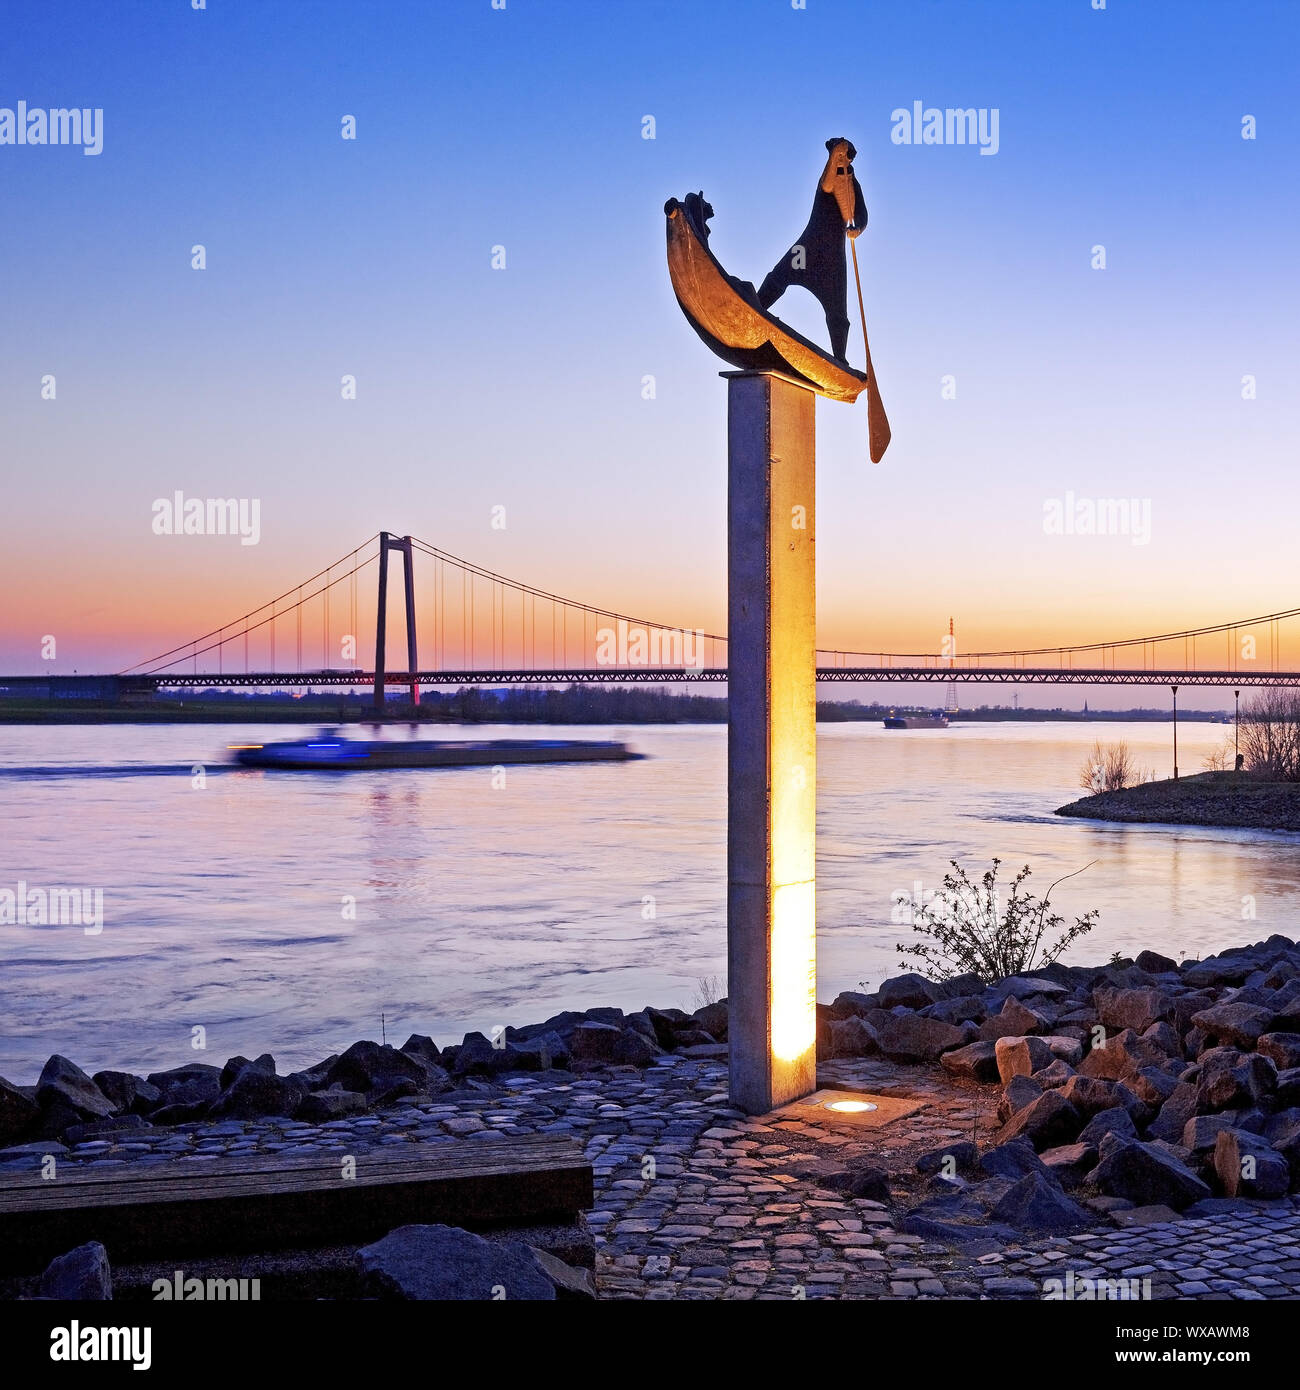 illuminated sculpture ferryman on the Rhine river bank in evening light, Emmerich, Germany, Europe Stock Photo